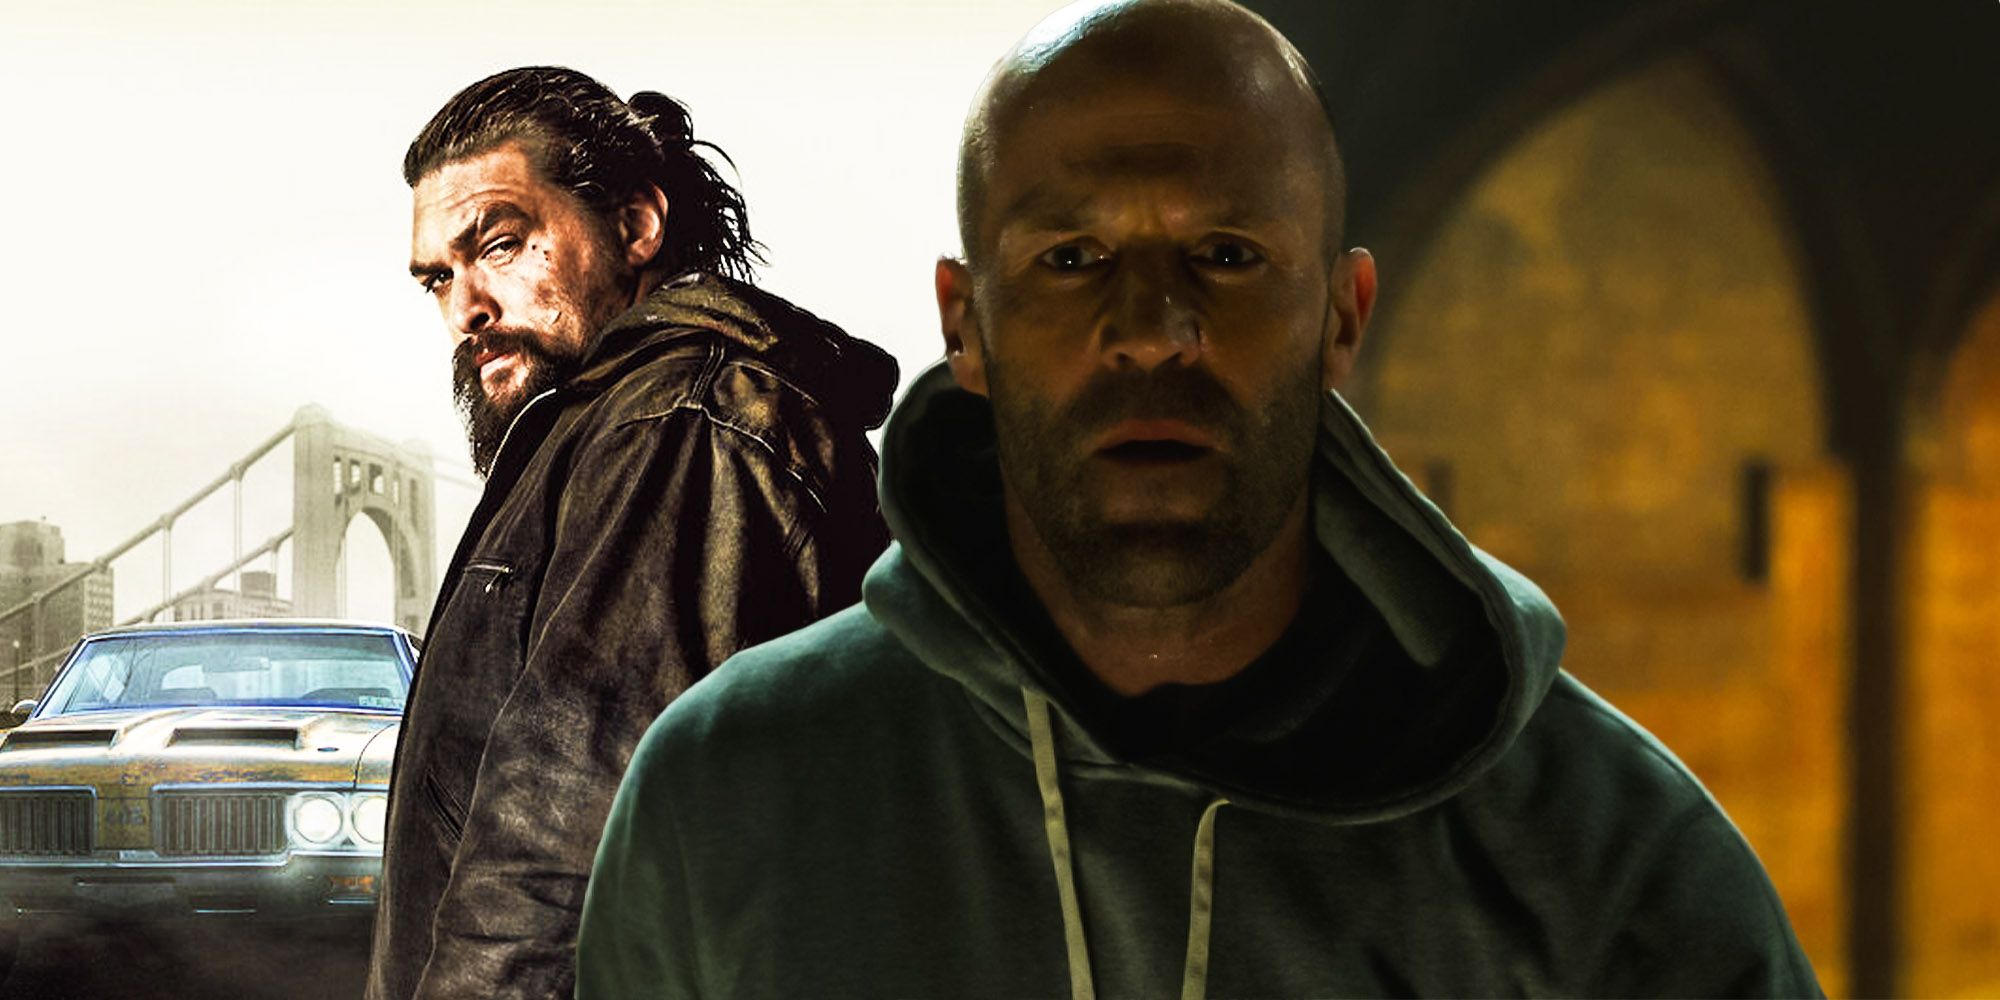 Fast and furious 10 jason momoa villain Needs To Avoid fast and furious trick deckard shaw